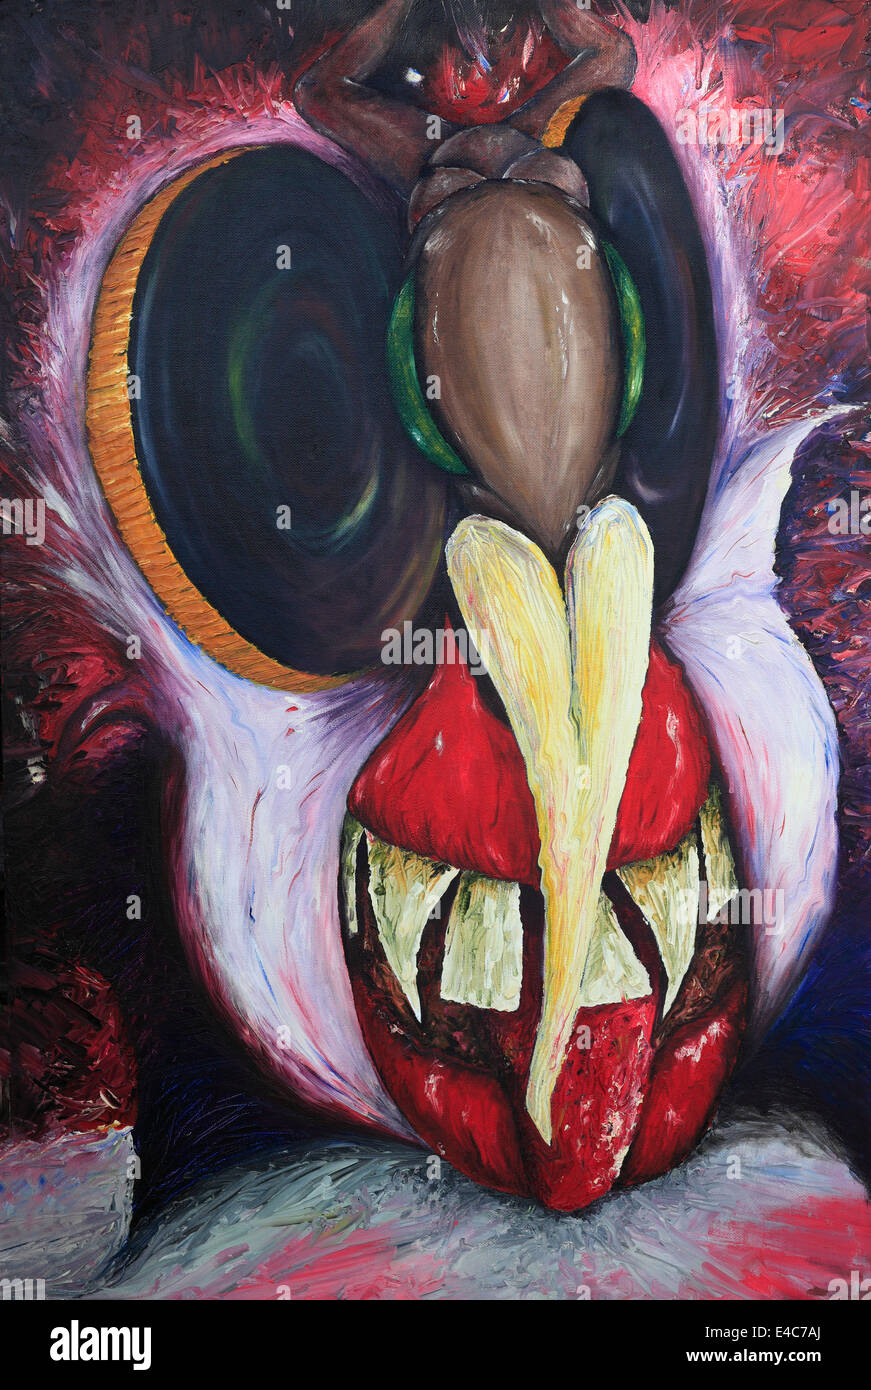 Photograph of a painting of a demon-like face. Stock Photo